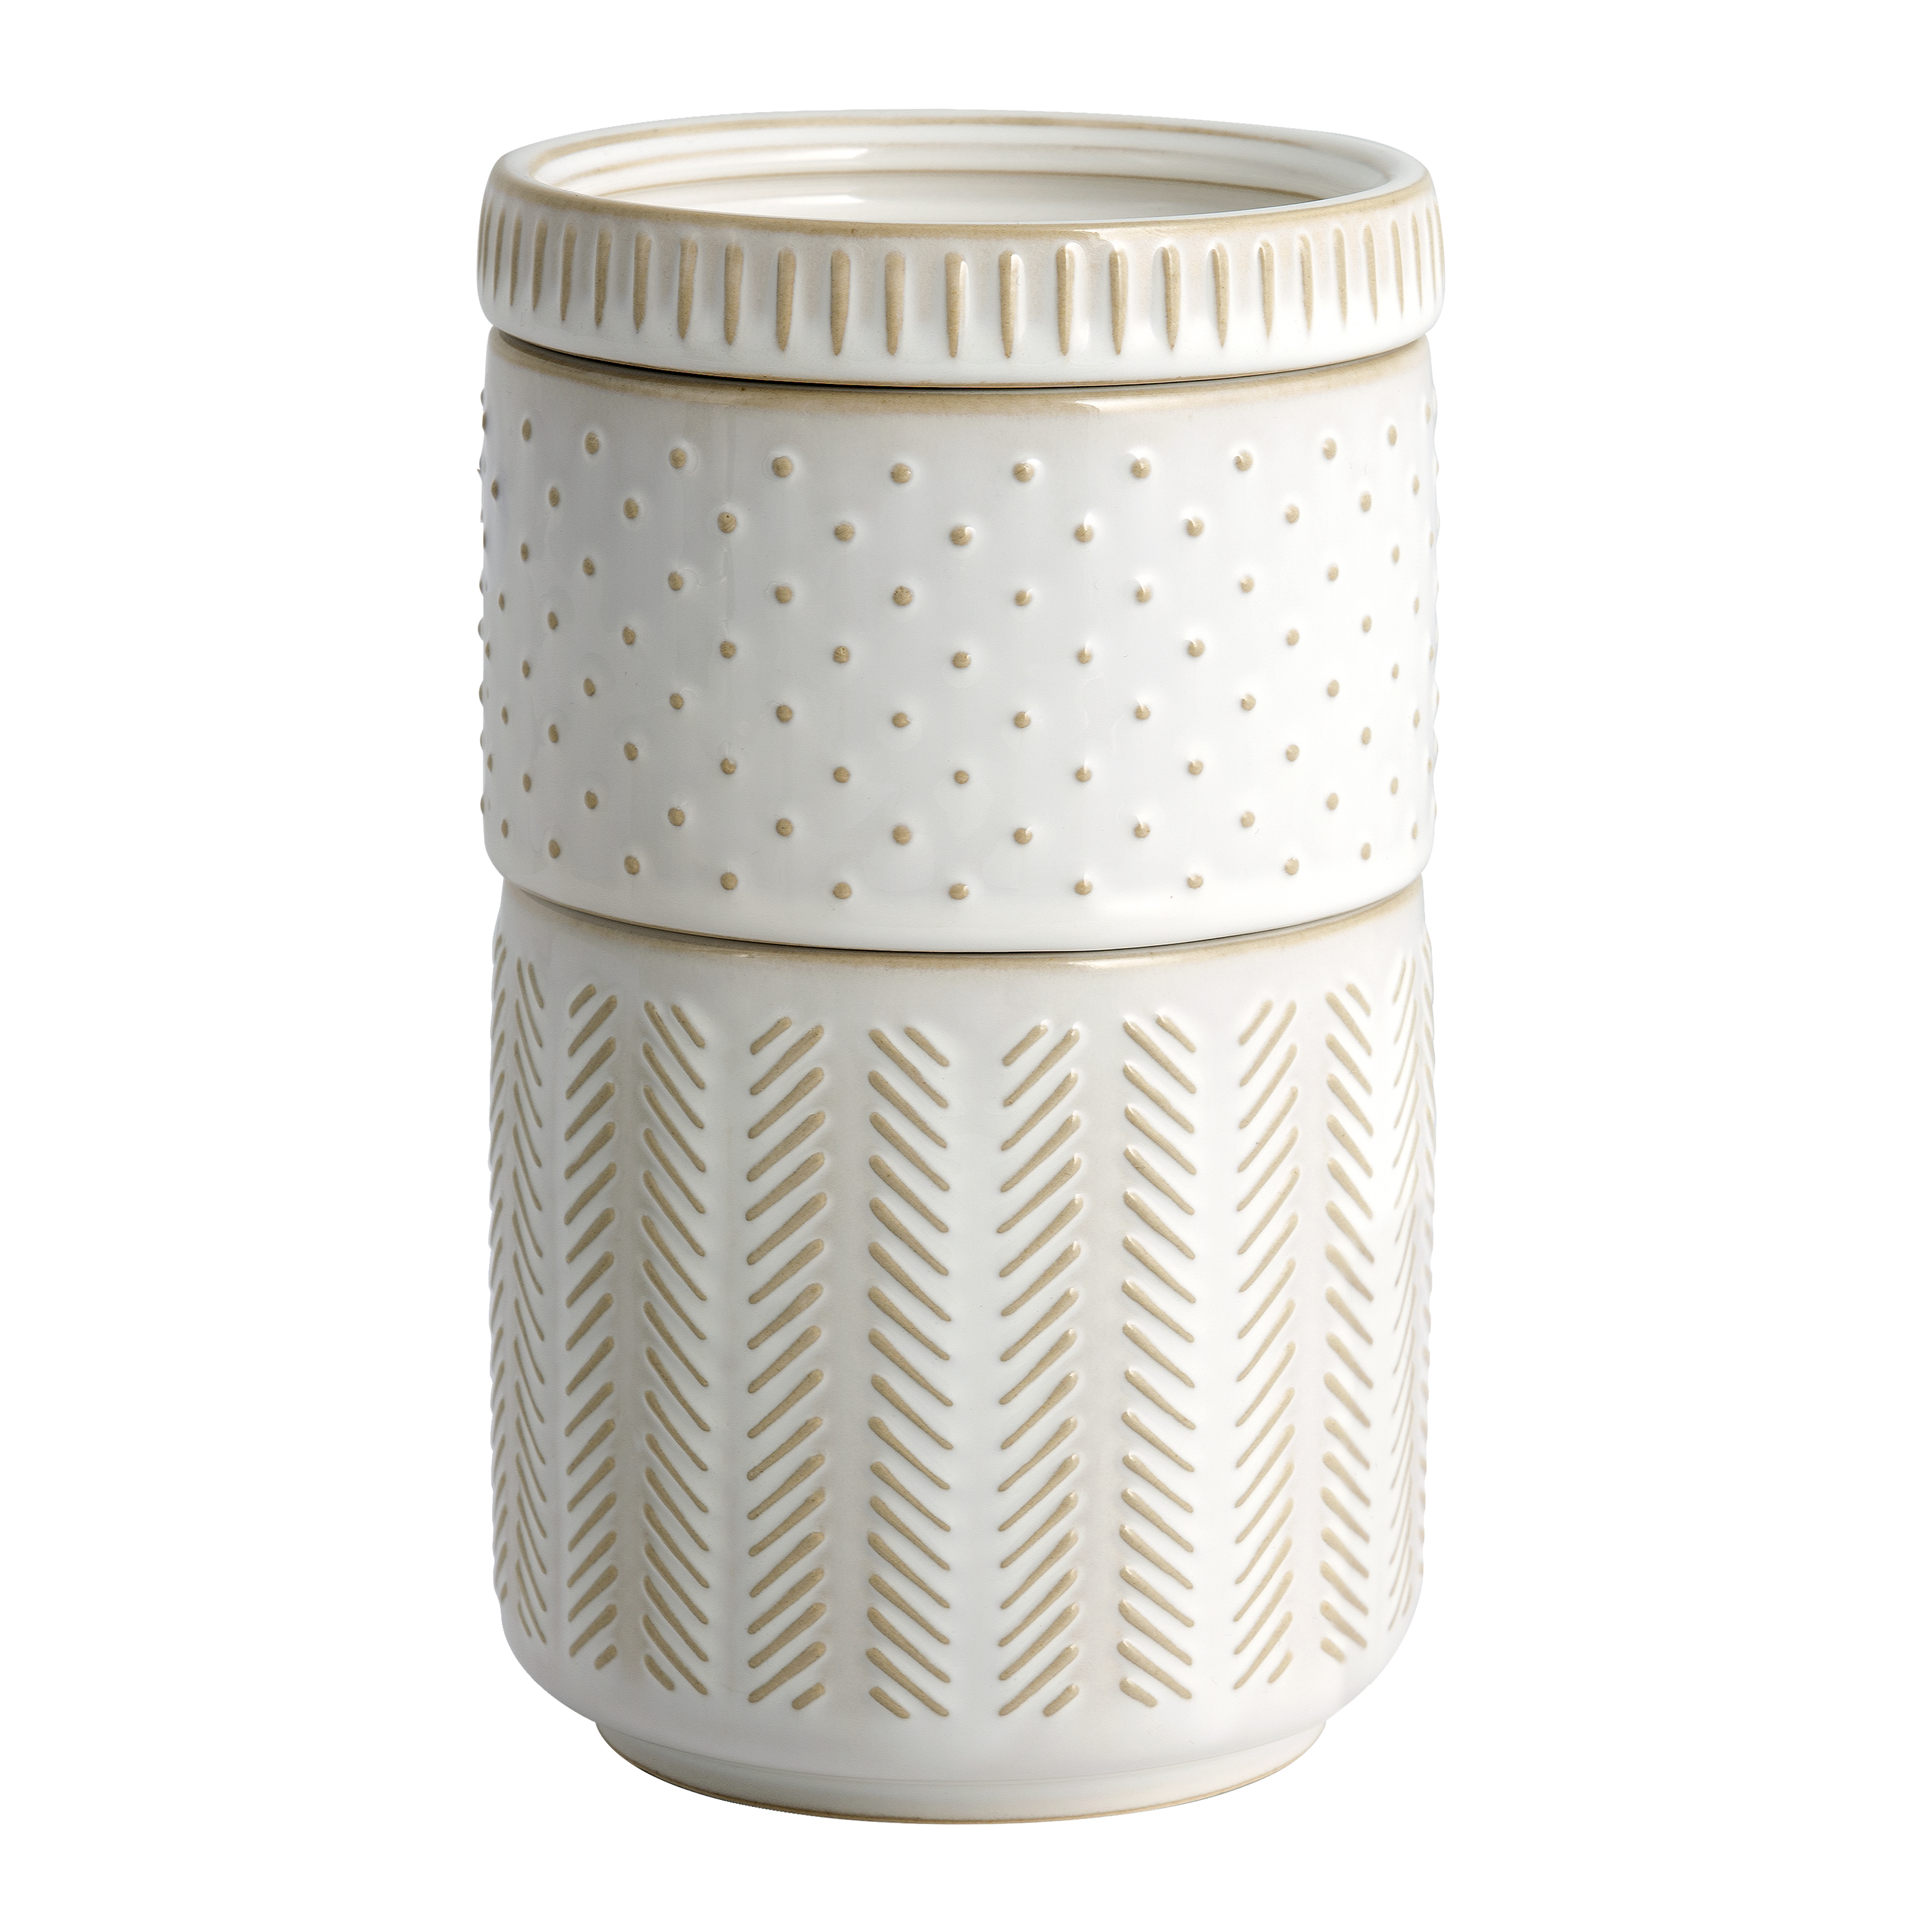 3-Piece Textured Ceramic Stackable Jar Set in Creamy White, Better Homes & Gardens - image 1 of 8